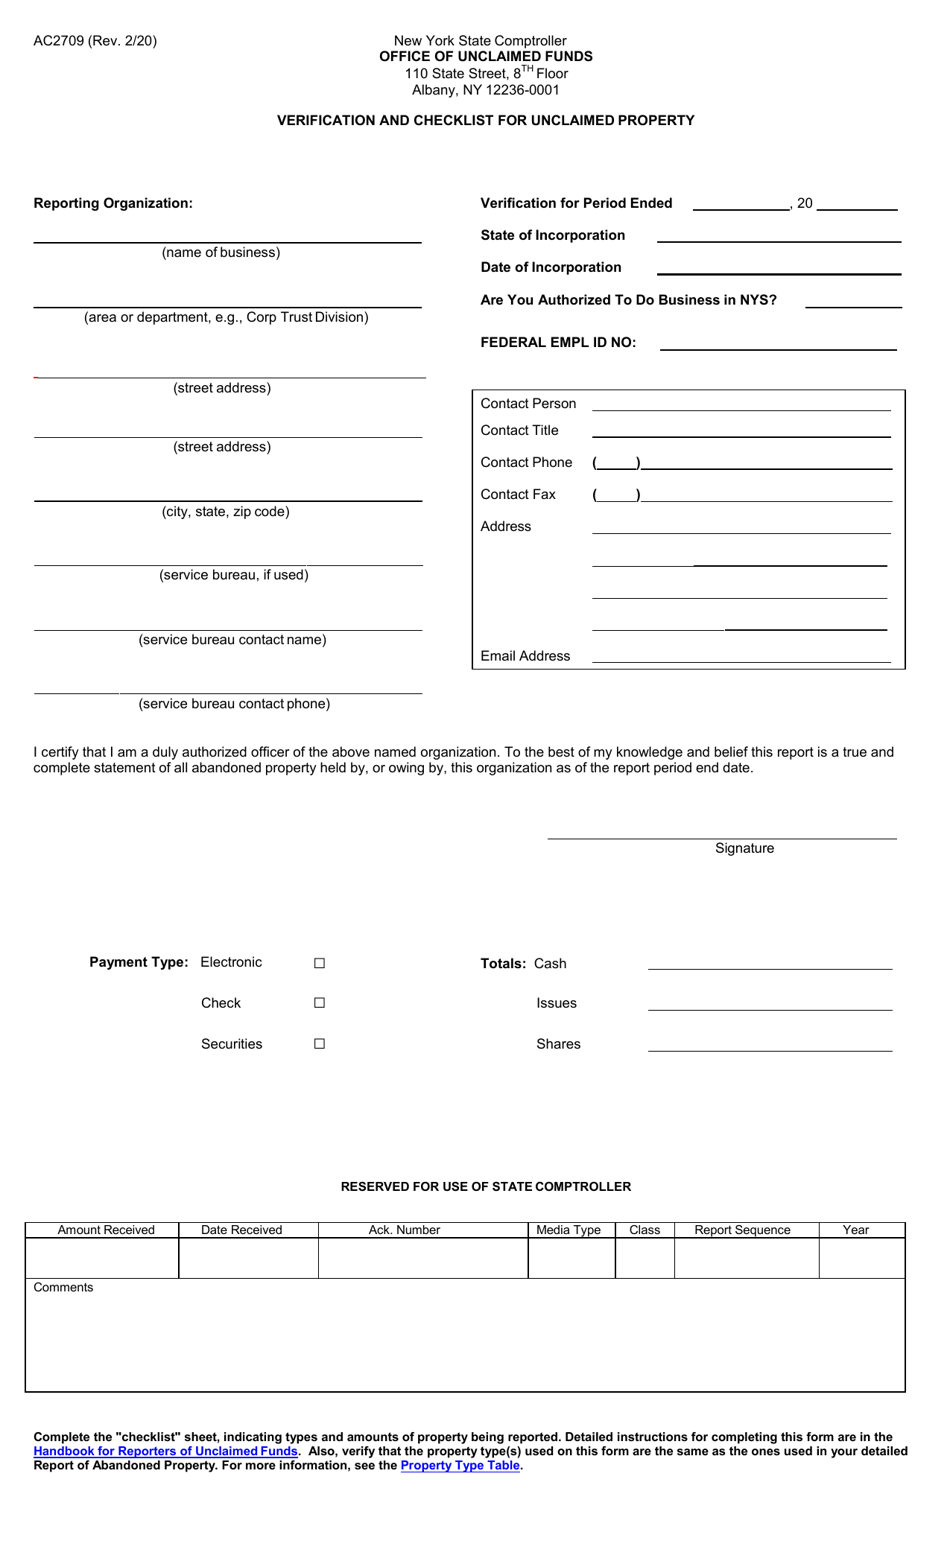 Form AC2709 Verification and Checklist for Unclaimed Property - New York, Page 1